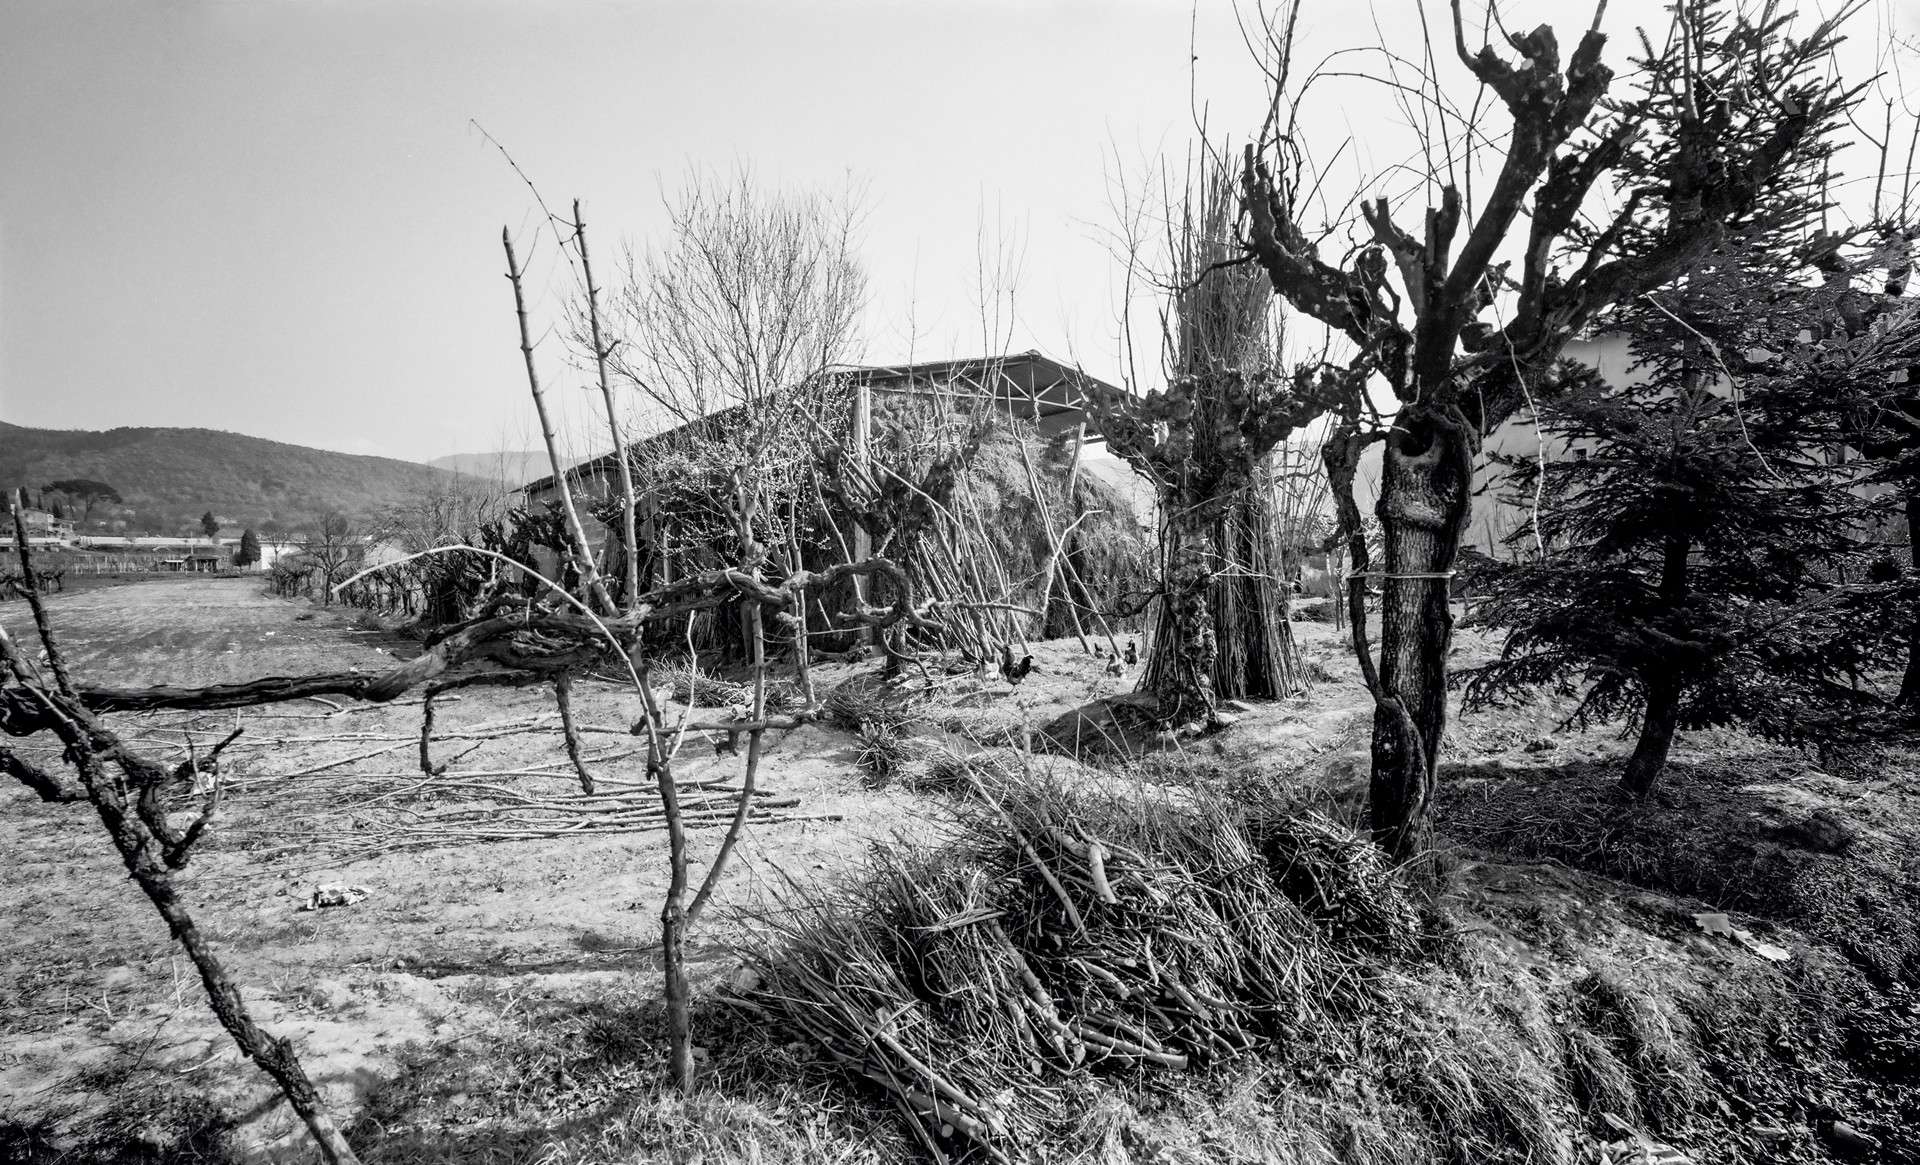 From Walks Around in the Farmland Valley, Farmhouse With Chickens and Stacked Cut Tree Limbs, Castiglion Fiorentino, Italy by Lawrence McFarland